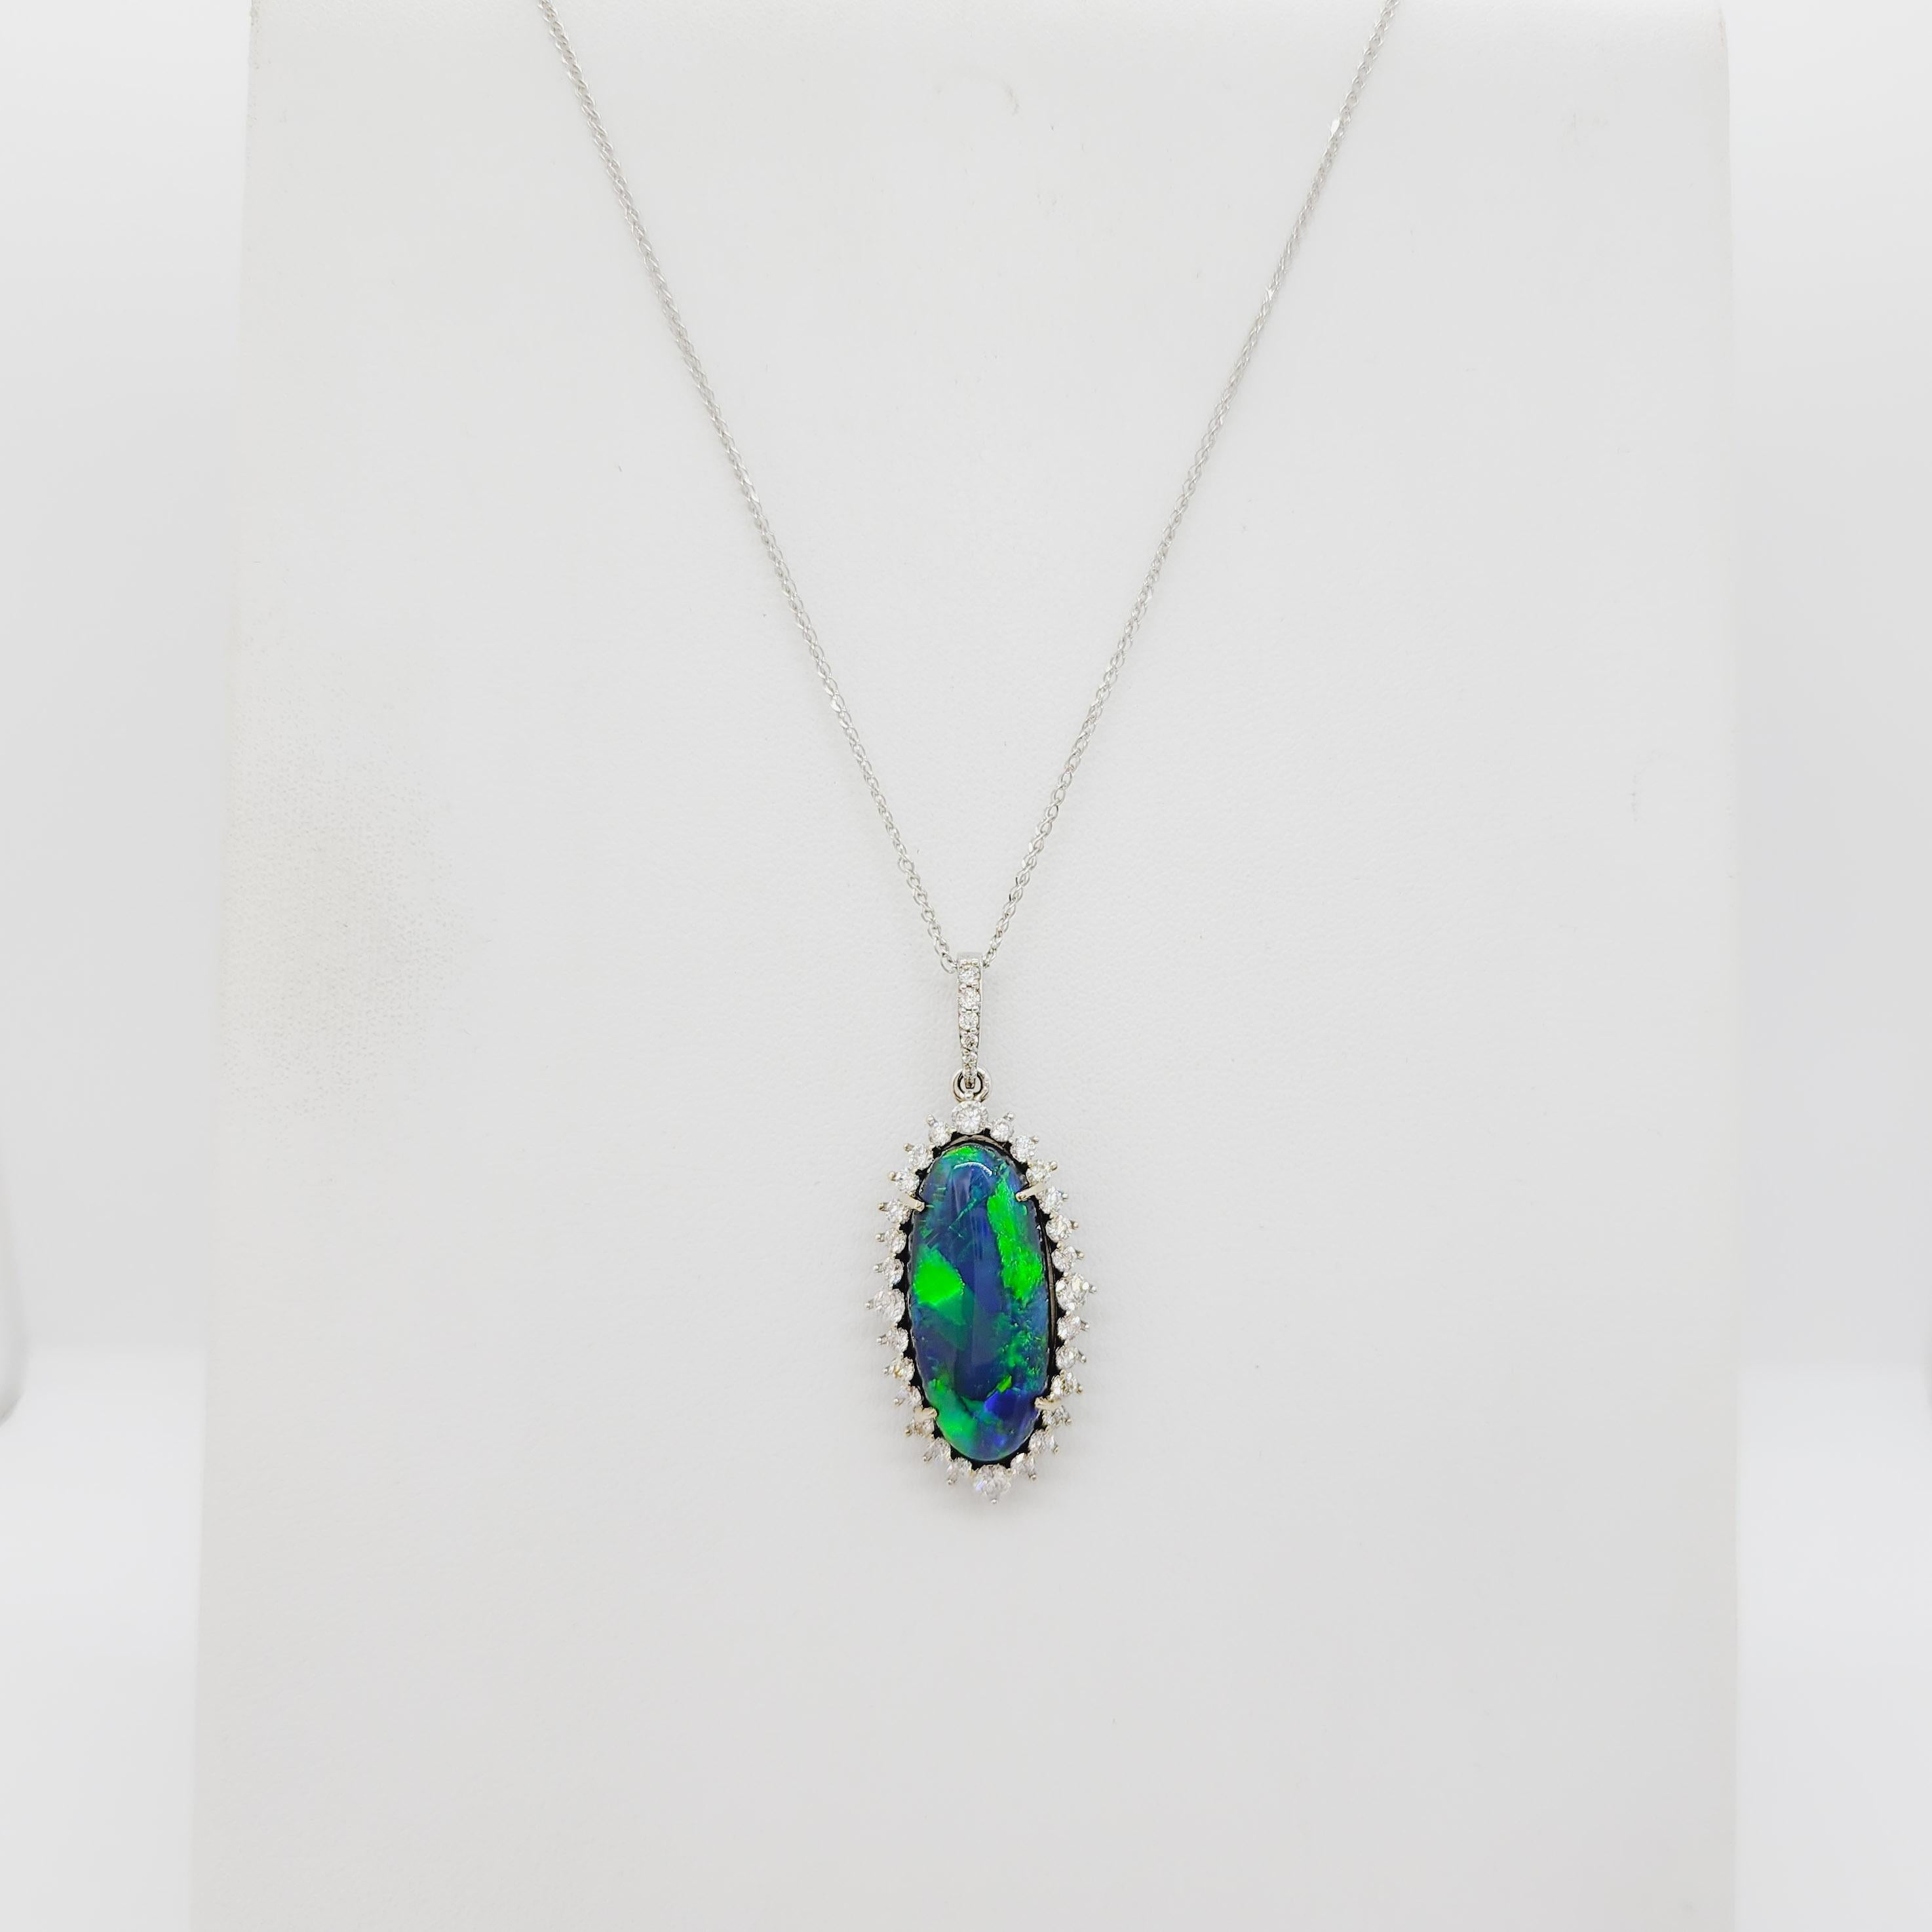 Beautiful 10.57 ct. black opal oval cabochon with 1.24 ct. good quality white diamond rounds.  Handmade in 18k white gold.  Length is 18